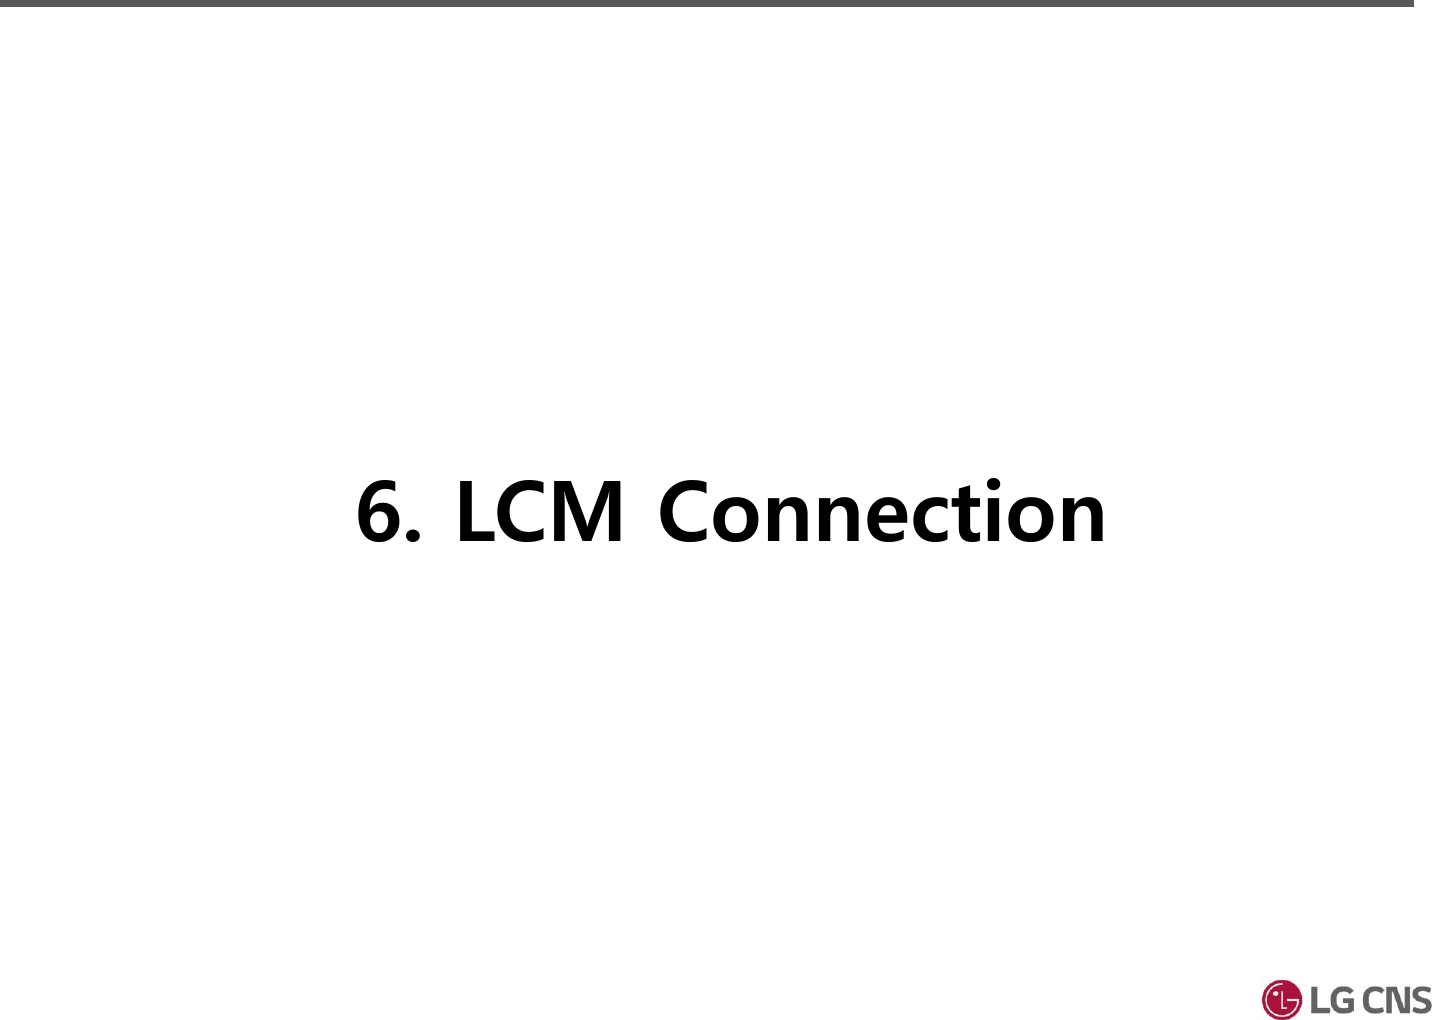 6. LCM Connection